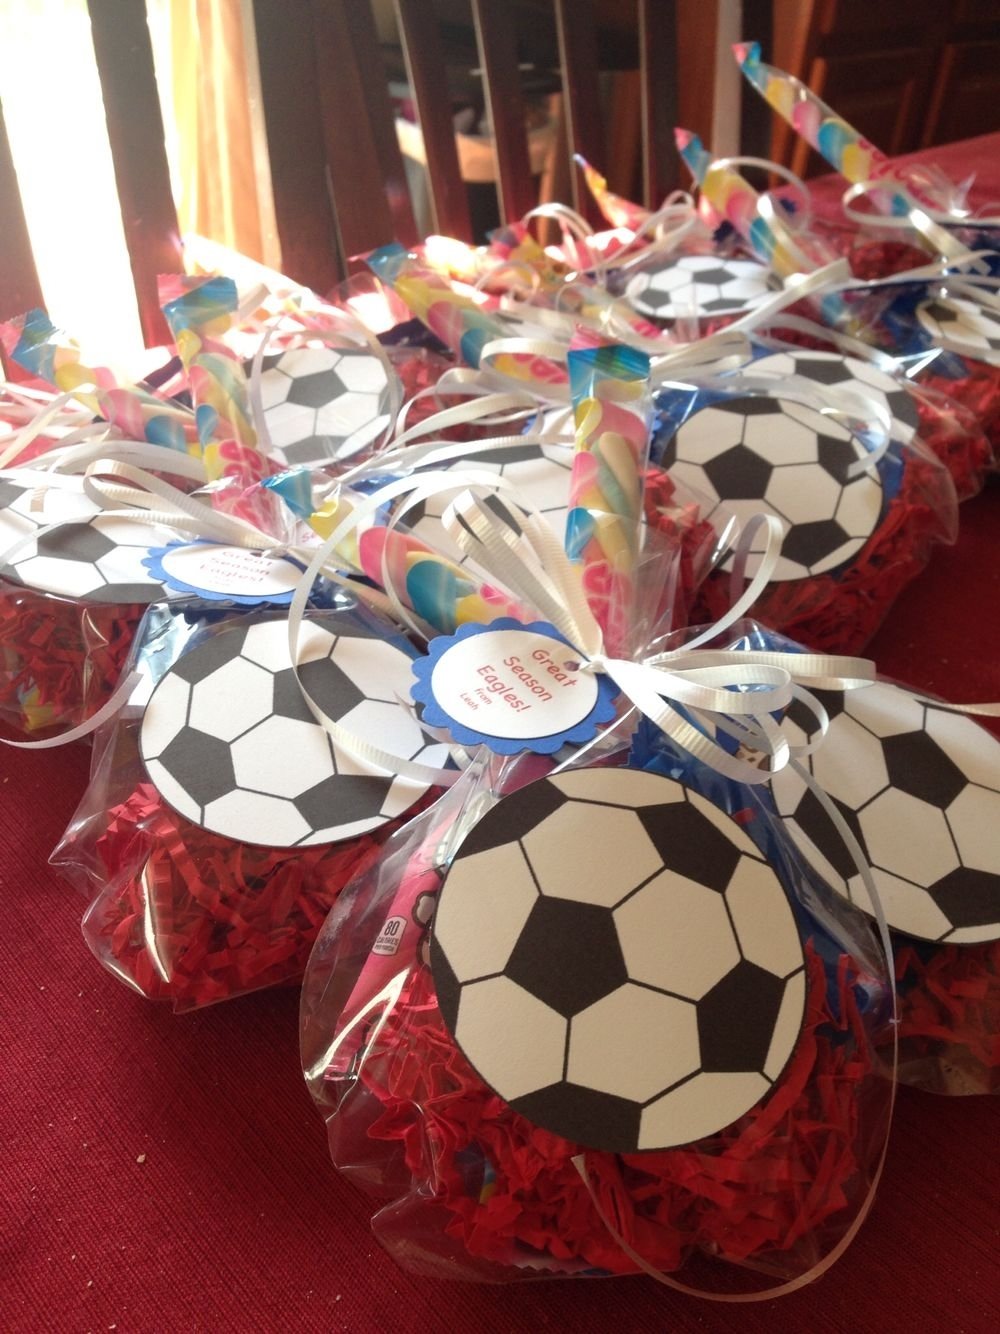 10 Nice End Of Season Soccer Party Ideas soccer goodies for the end of the season party favors giveaways 2023